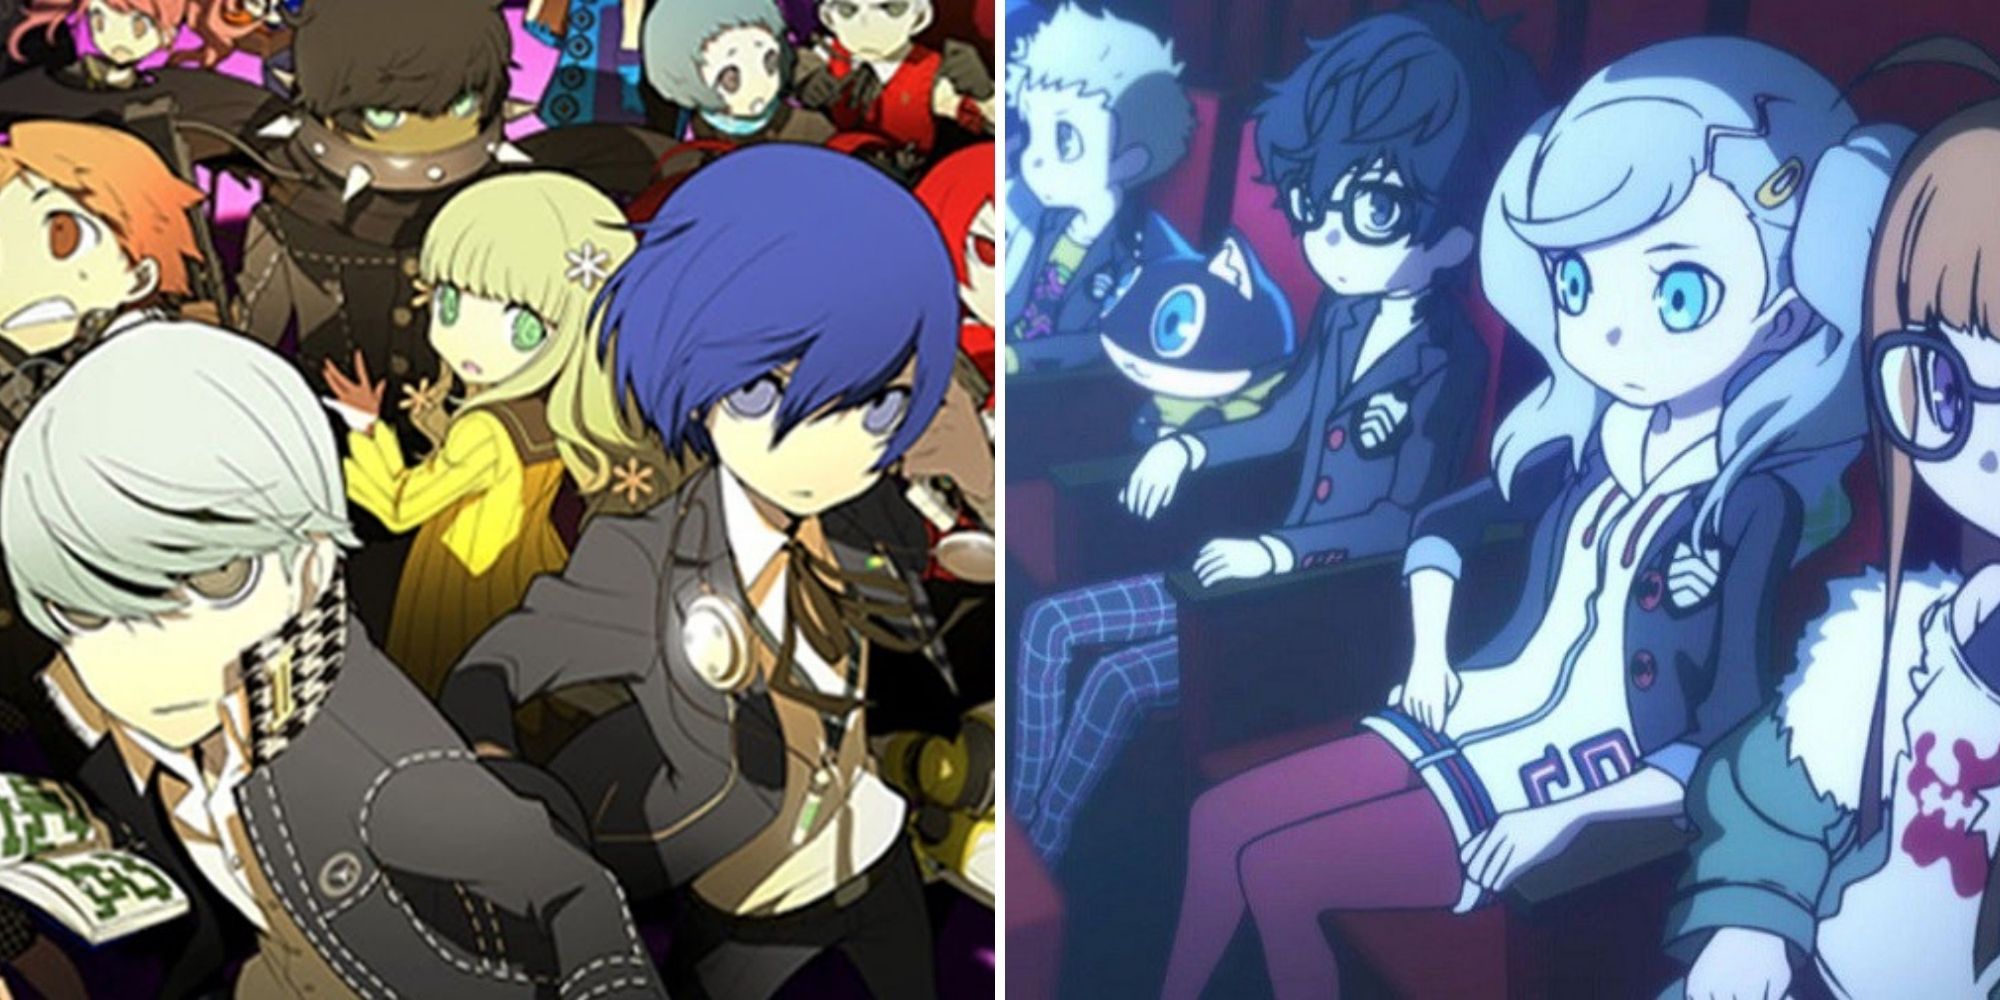 Characters from Persona 3 and 4 stand together while the Persona 5 cast watch a movie together